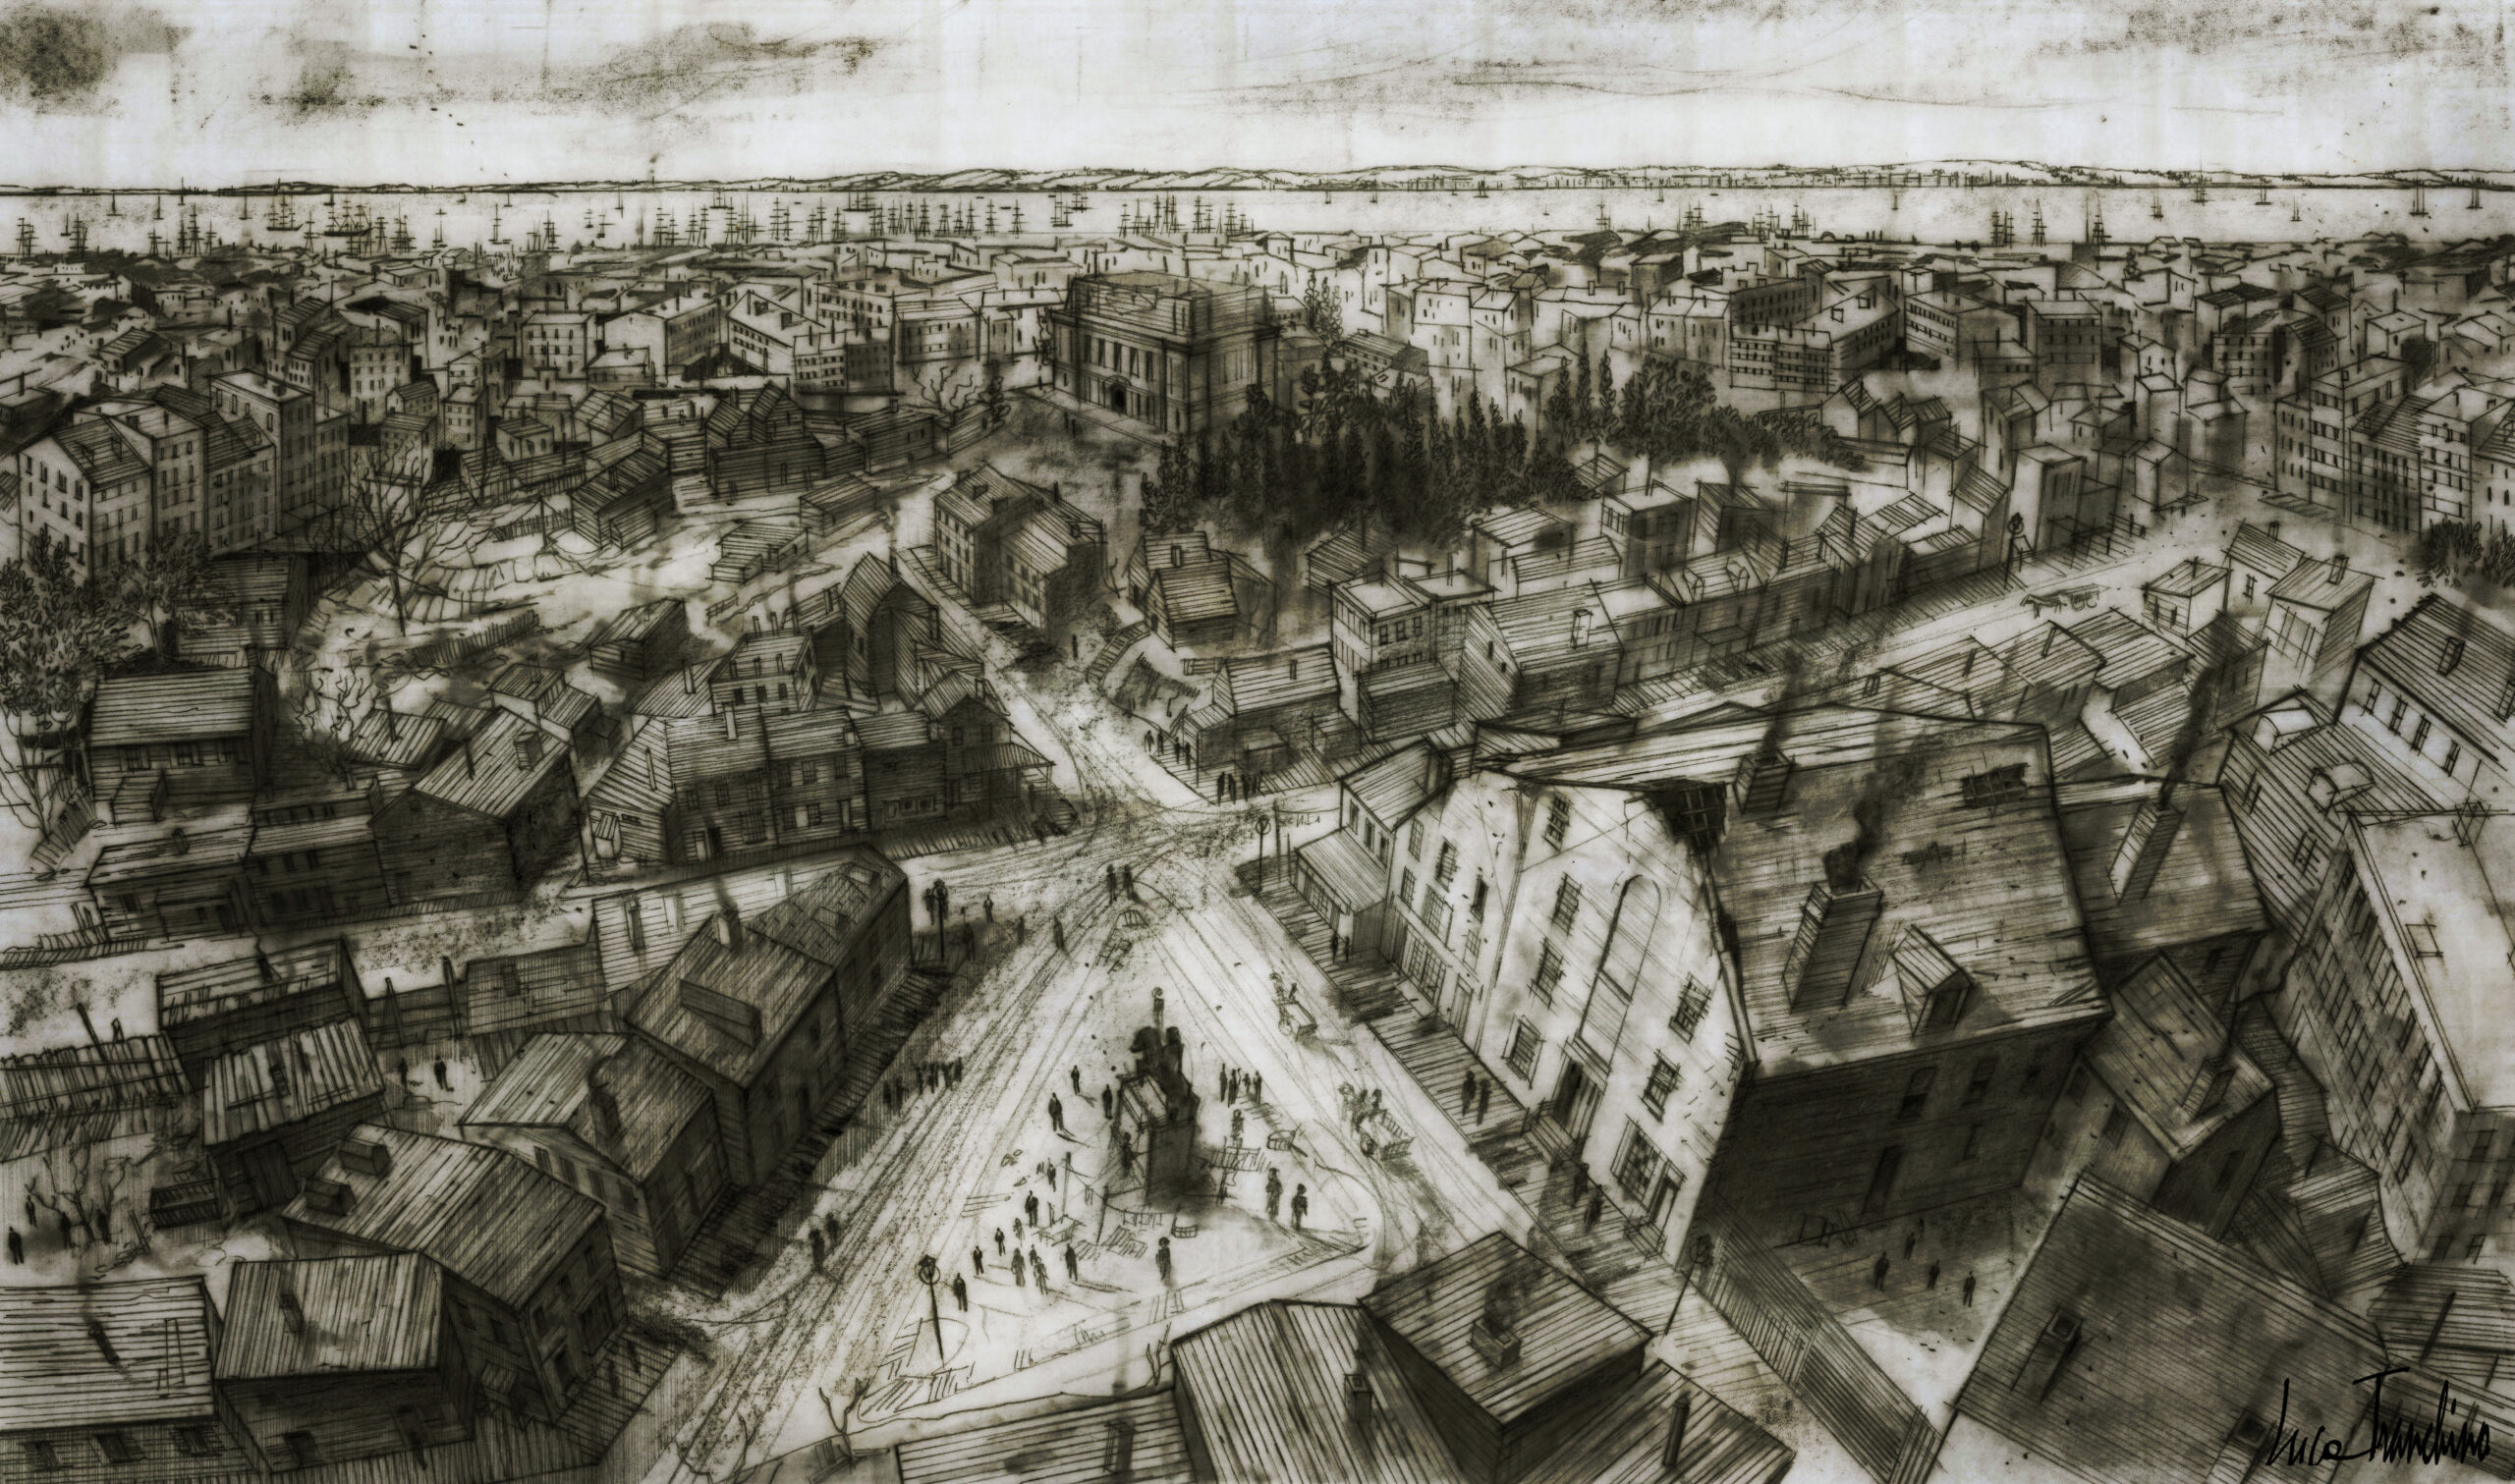 Gangs of New York - Directed by Martin Scorsese - Five Points Square - Design Sketch by Luca Tranchino - ©2002 - Miramax Films